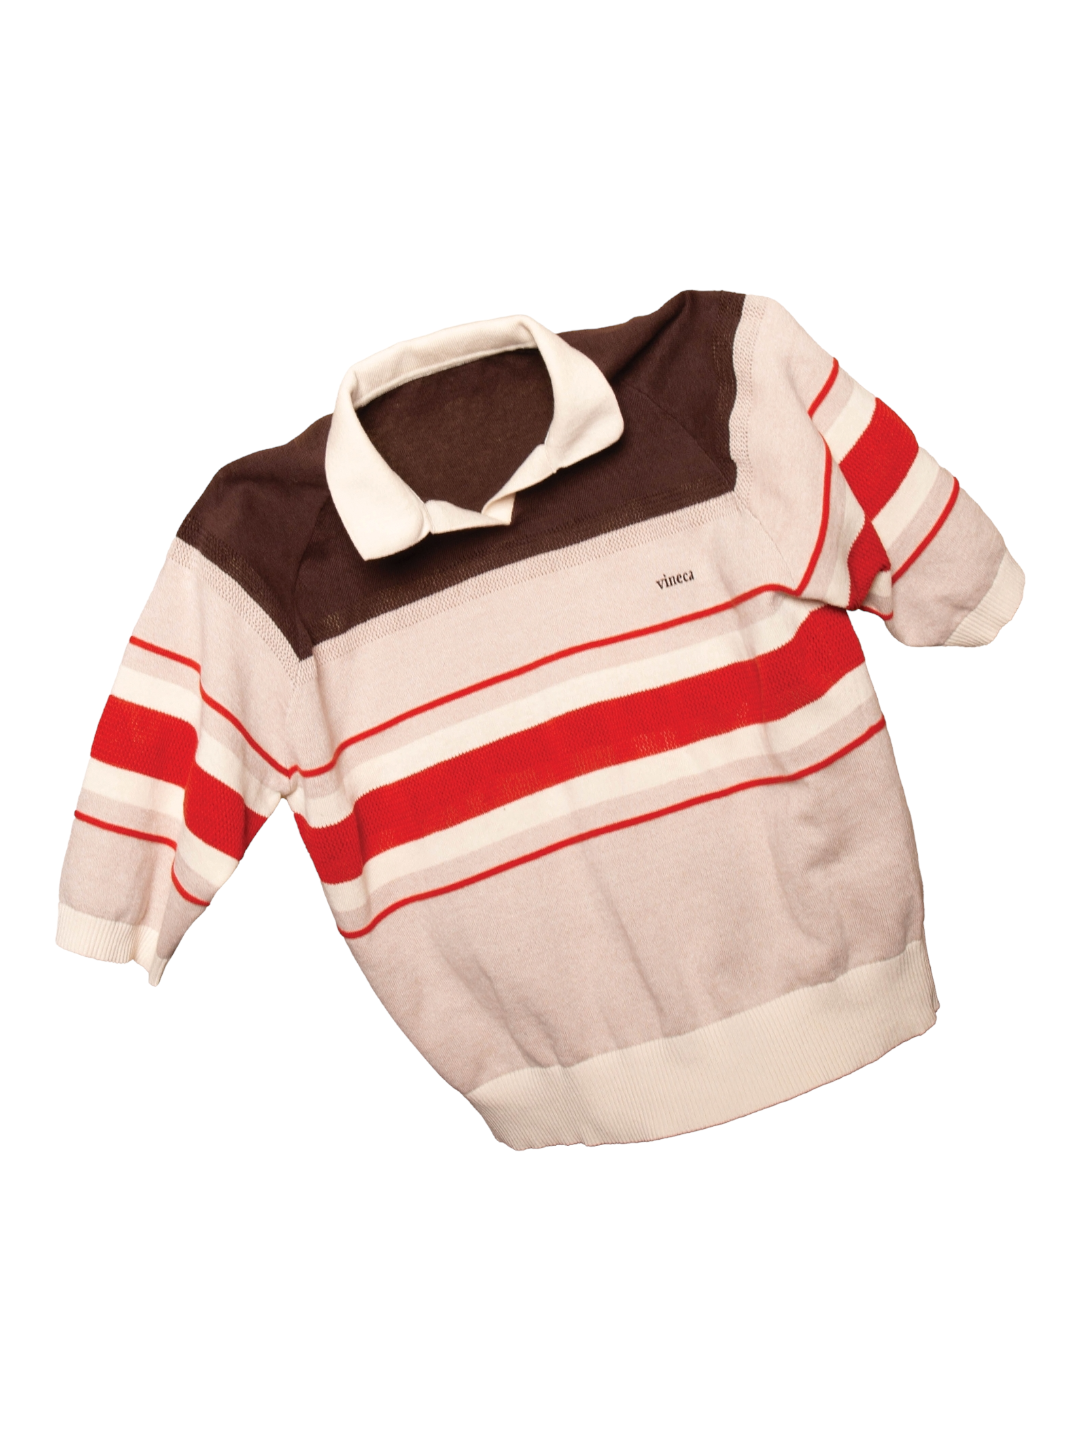 Vinecation Knit Polo (Brown)